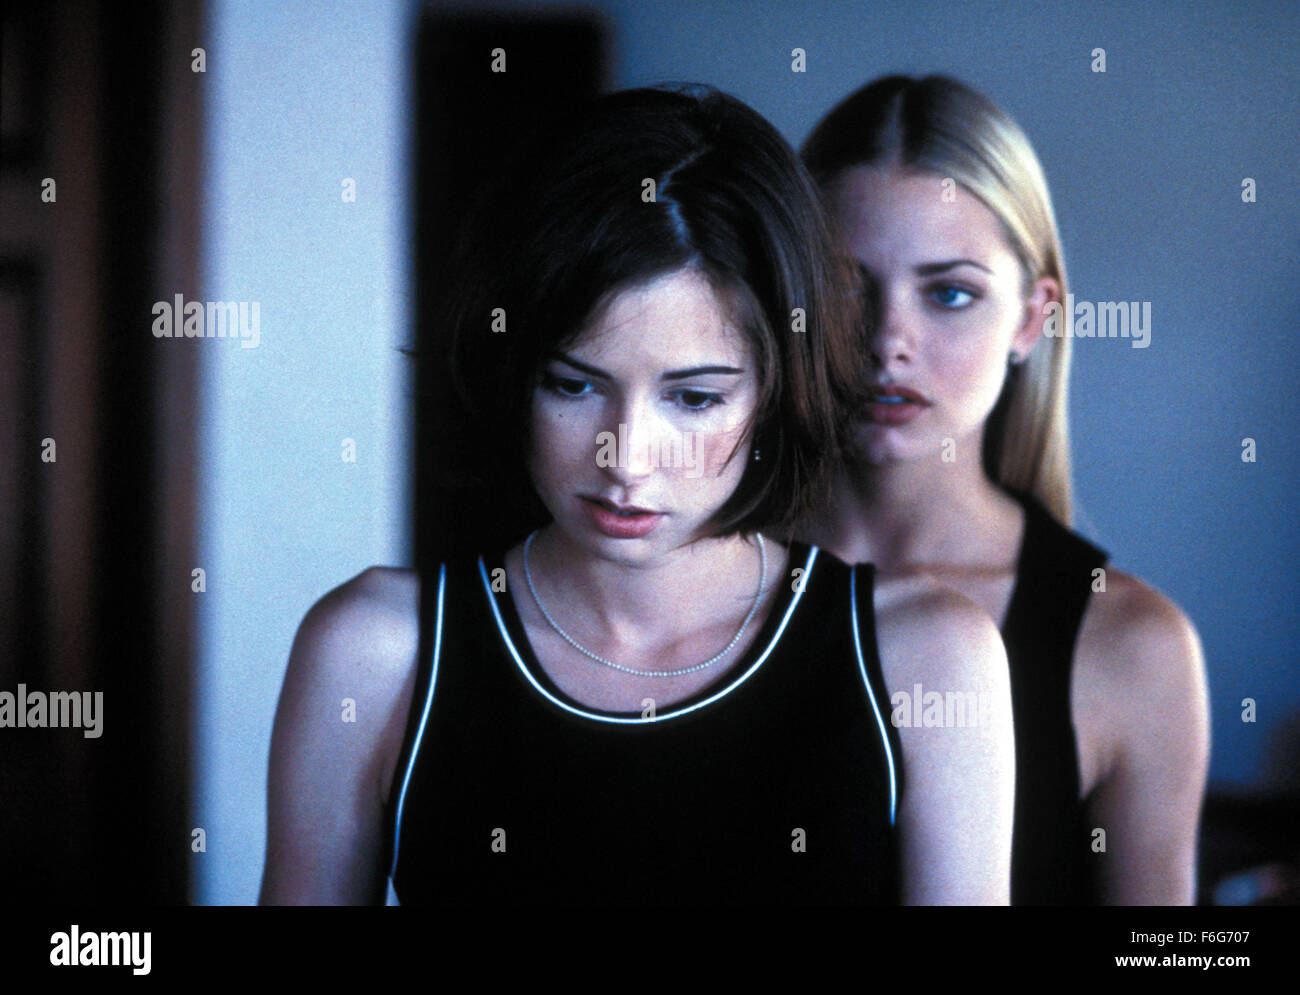 Apr 07, 1997; Hollywood, CA, USA; Actresses MEGAN EDWARDS (Front) as Joy Greer and JAIME PRESSLY as Violet star in the drama thriller 'Poison Ivy: The New Seduction' directed by Kurt Voss. Stock Photo